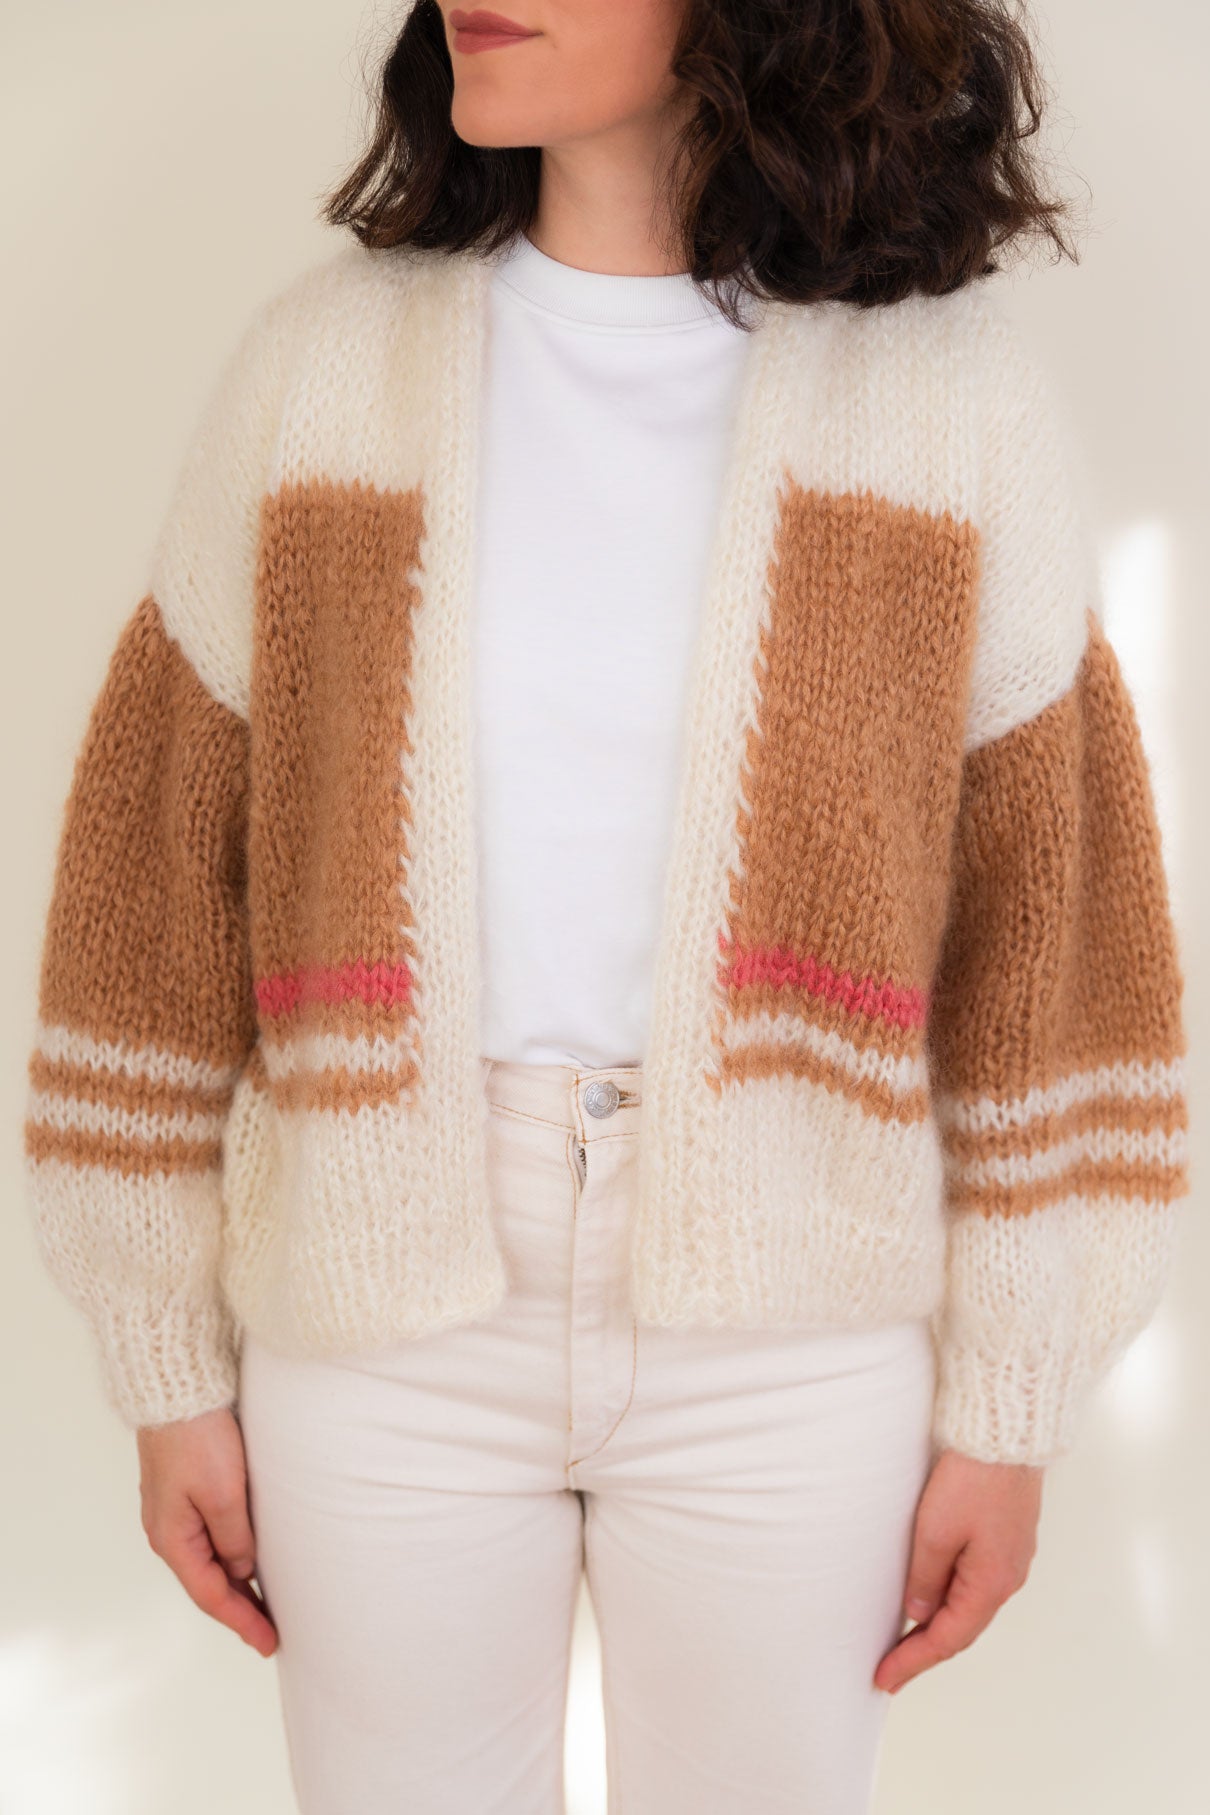 Mohair-Bio Wool Cardigan with camel and ivory white stripes.